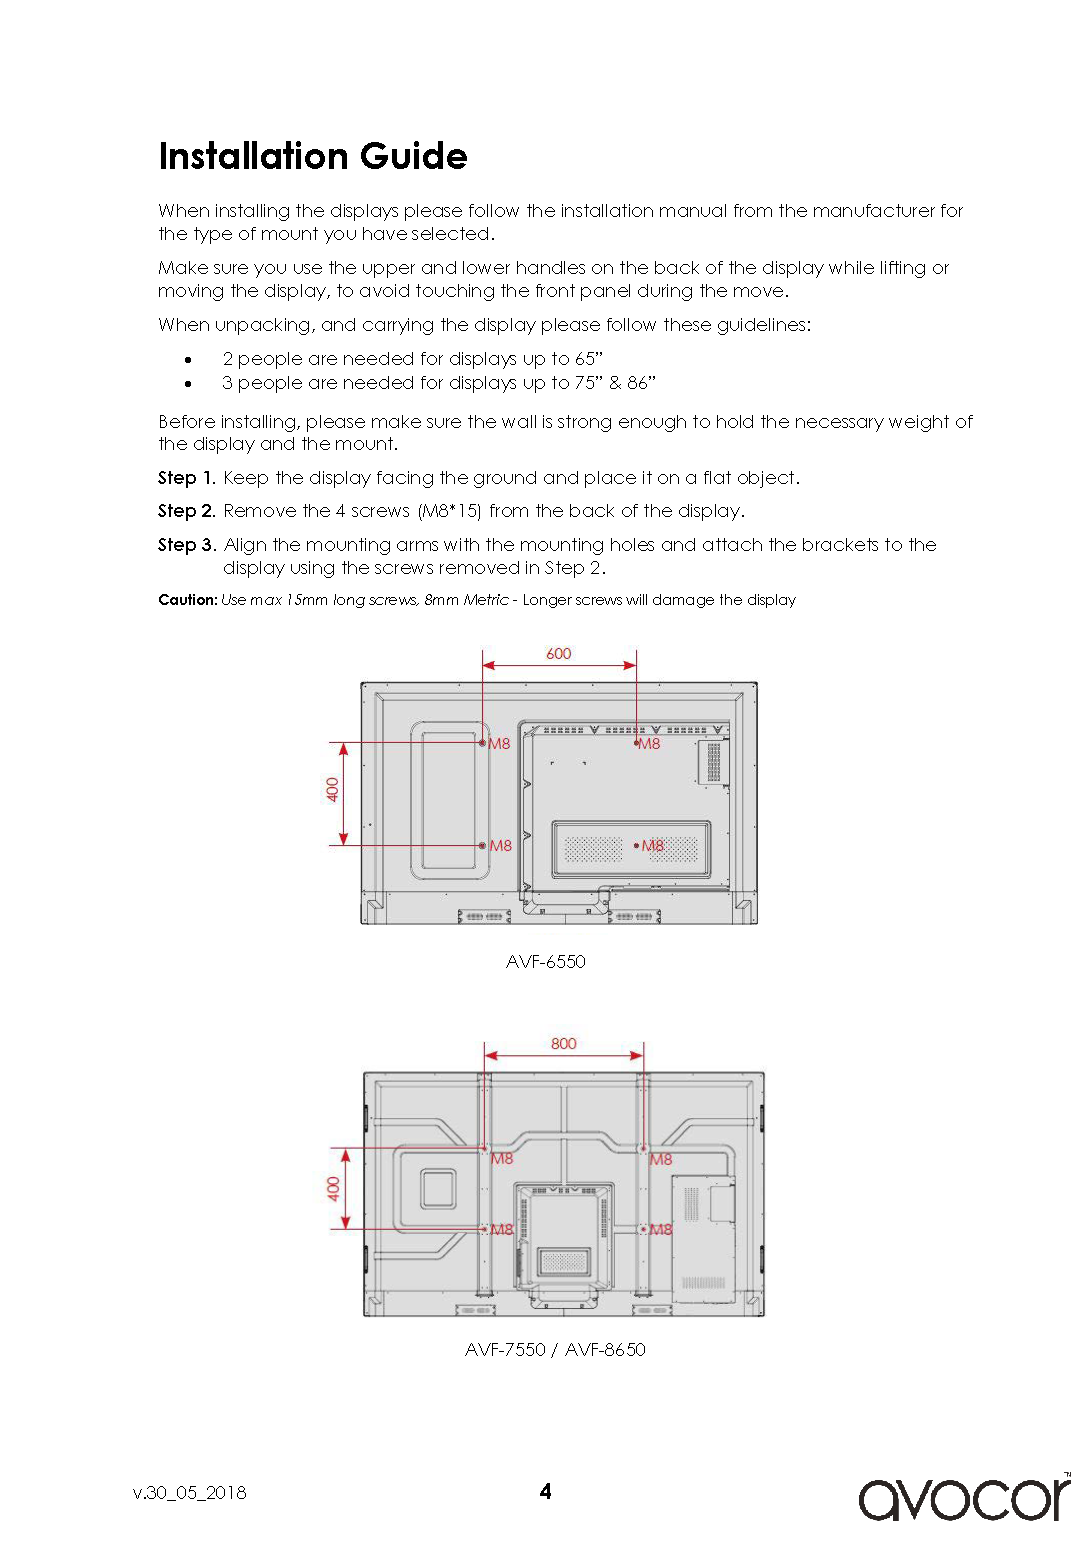 AVF-6550_Quick_Start_Guide_Page_04.png